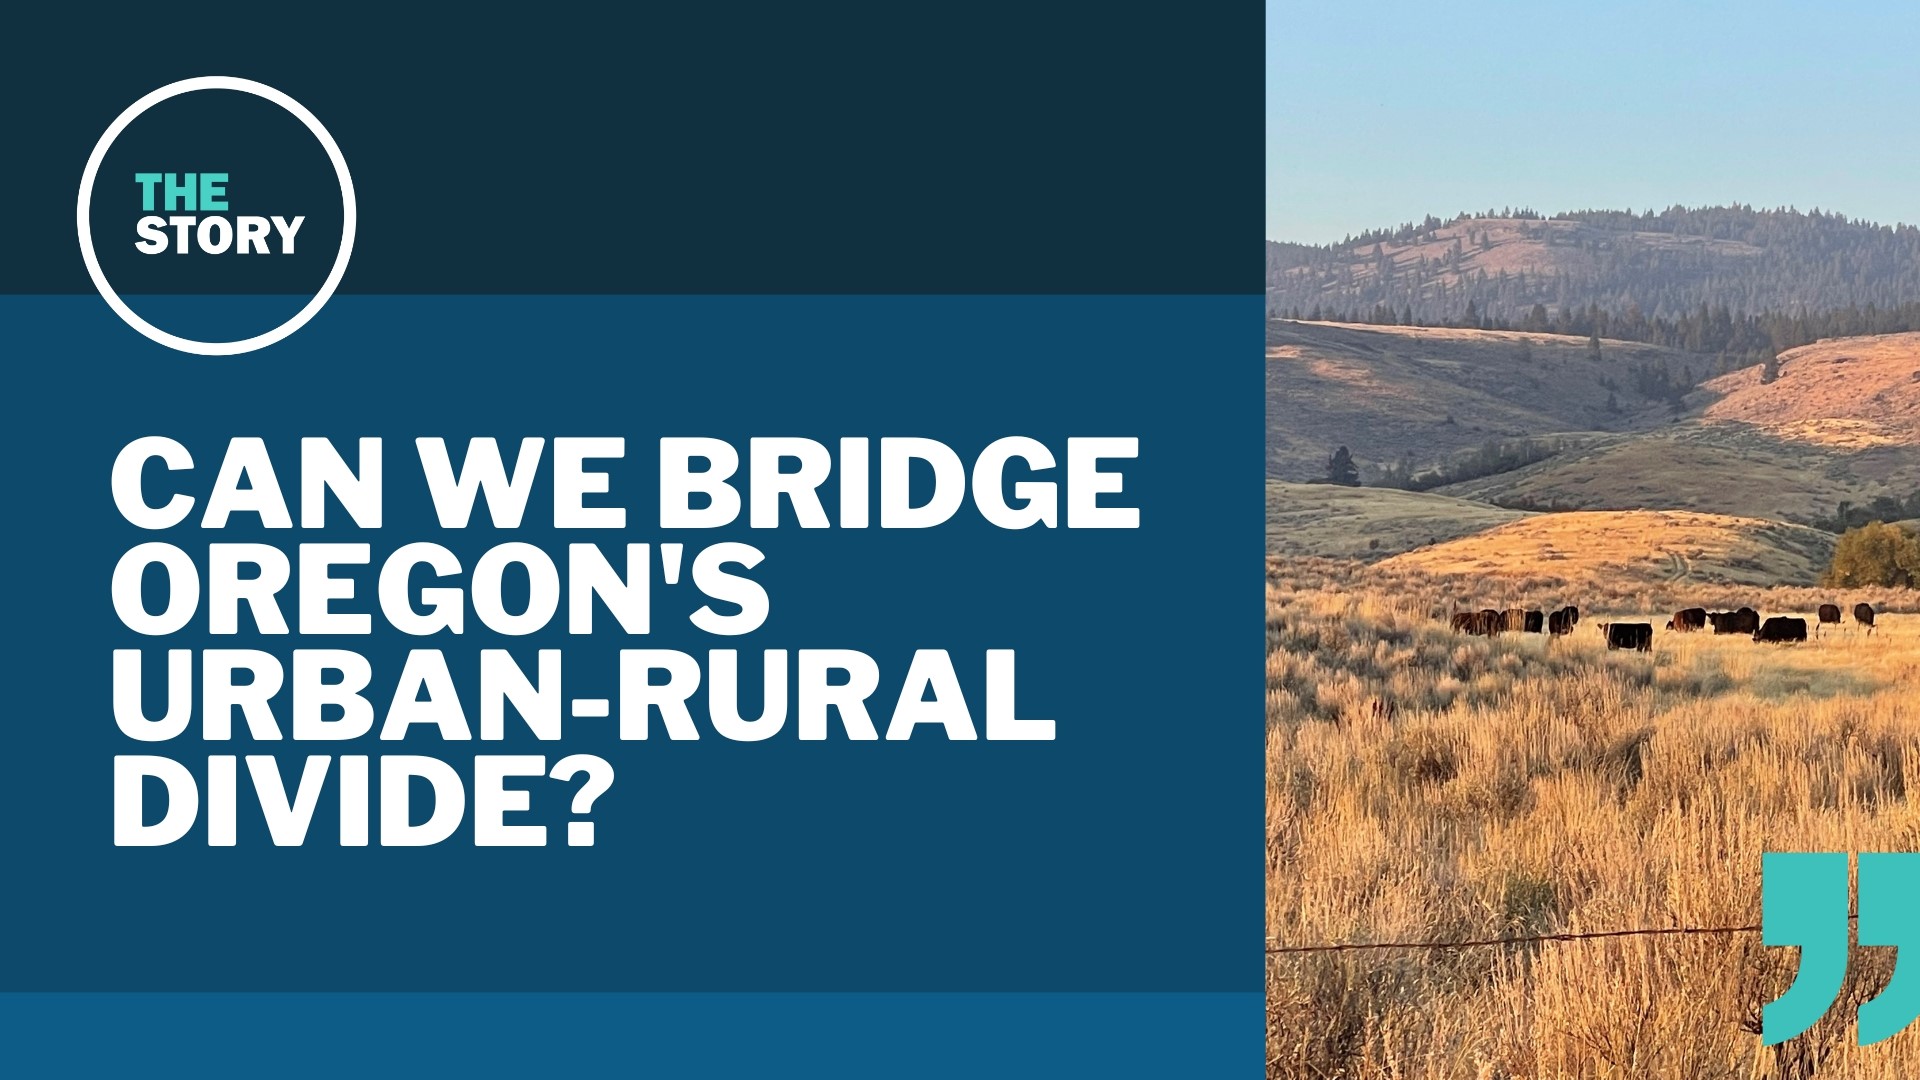 We’ve received a lot of suggestions for way that eastern Oregon could feel better represented. Some of them, however, wouldn’t fly in court.